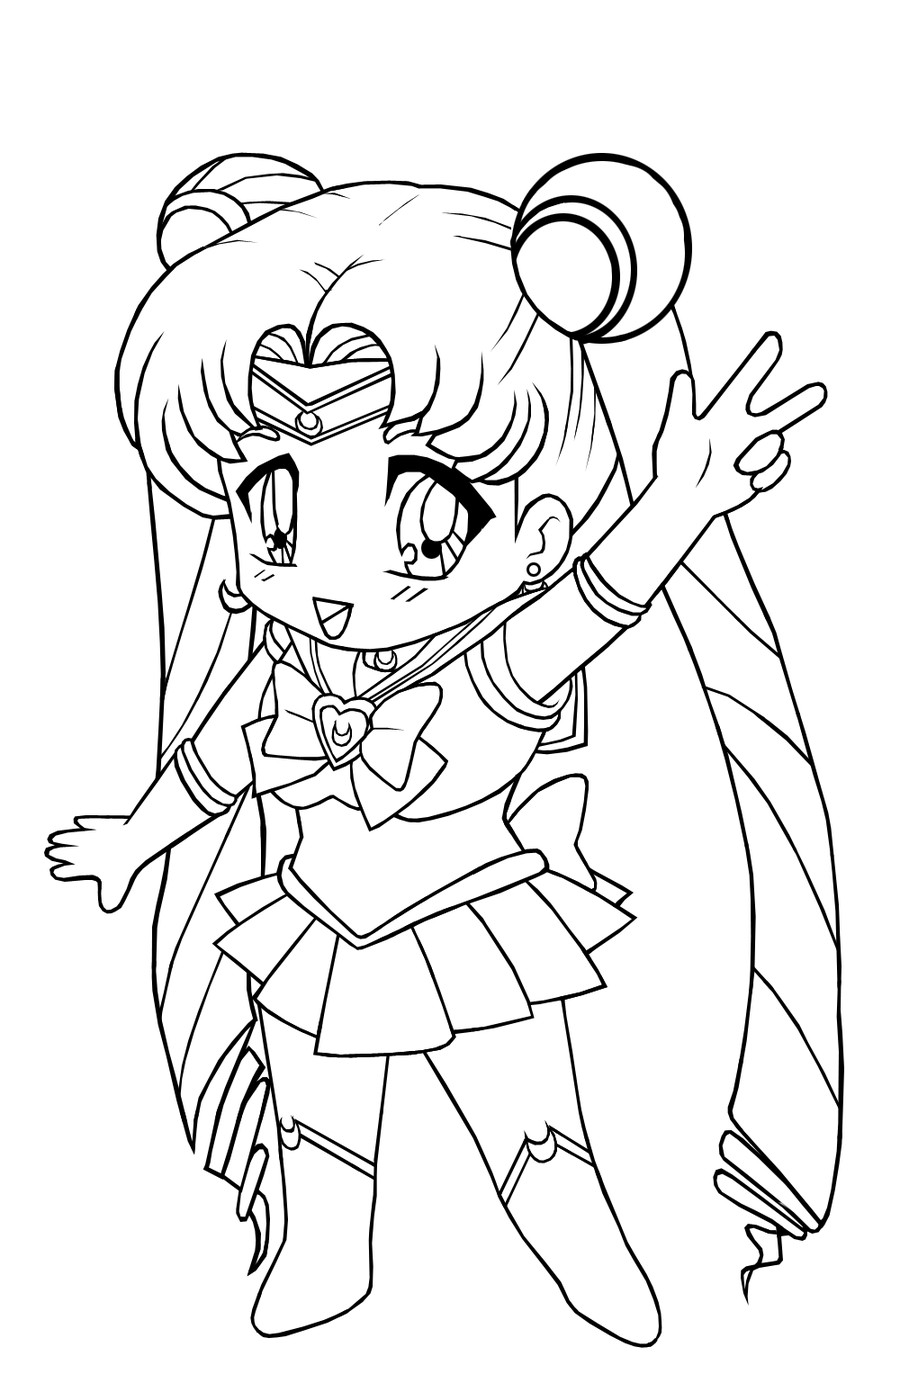 Girl Cartoon Coloring Pages
 Anime Cat Coloring Pages Coloring Pages